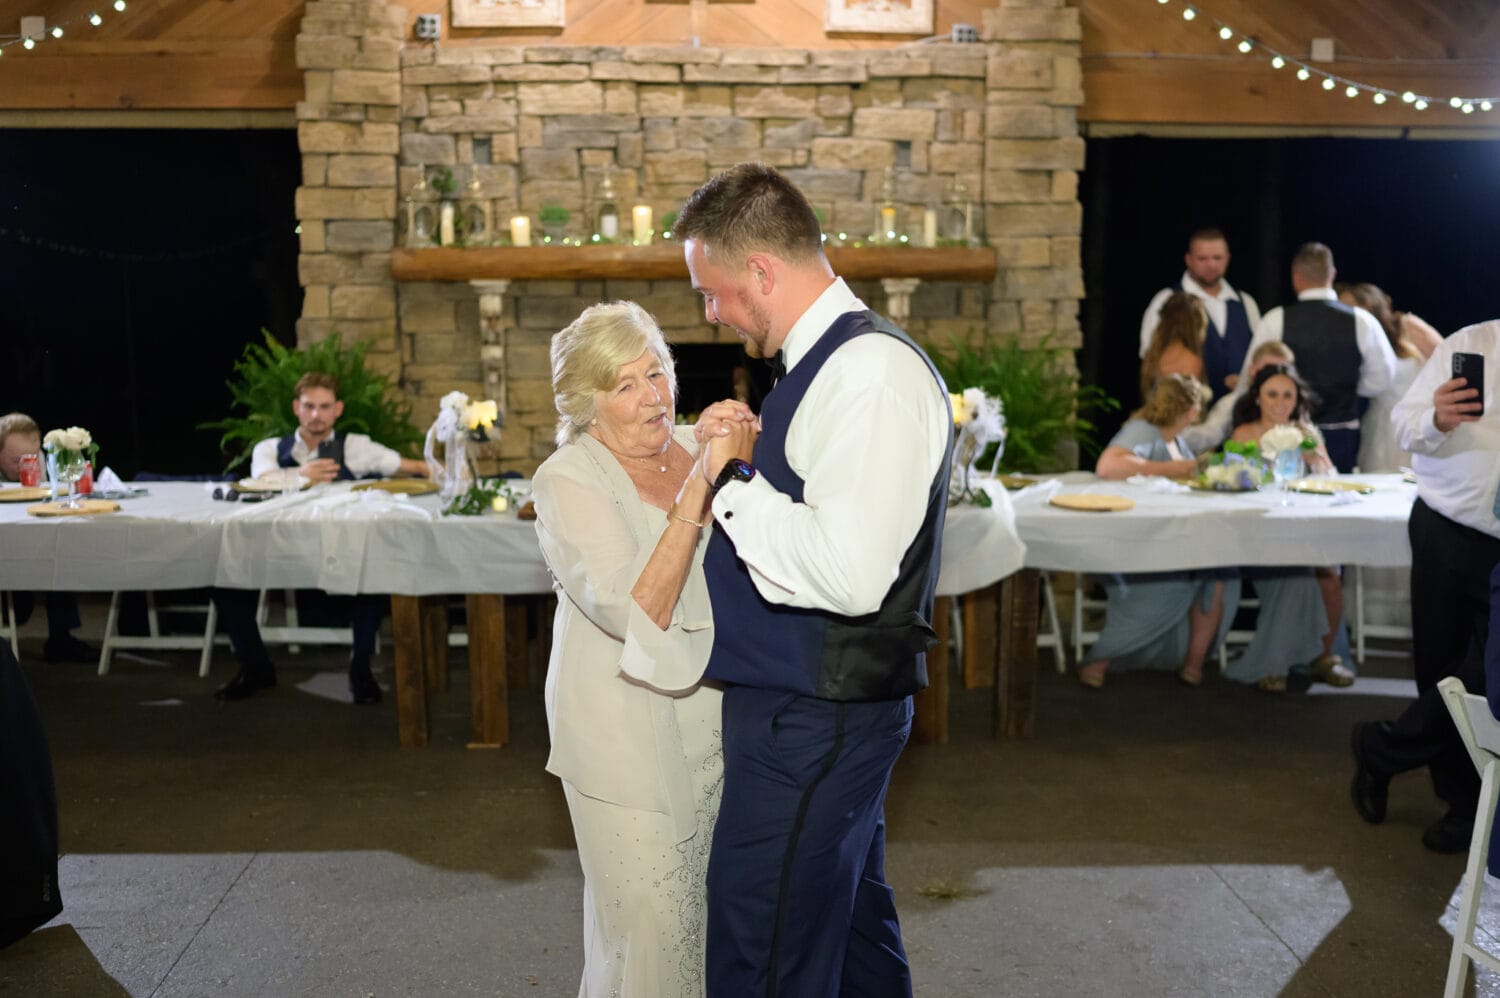 Groom dancing with mother - Wildhorse at Parker Farms